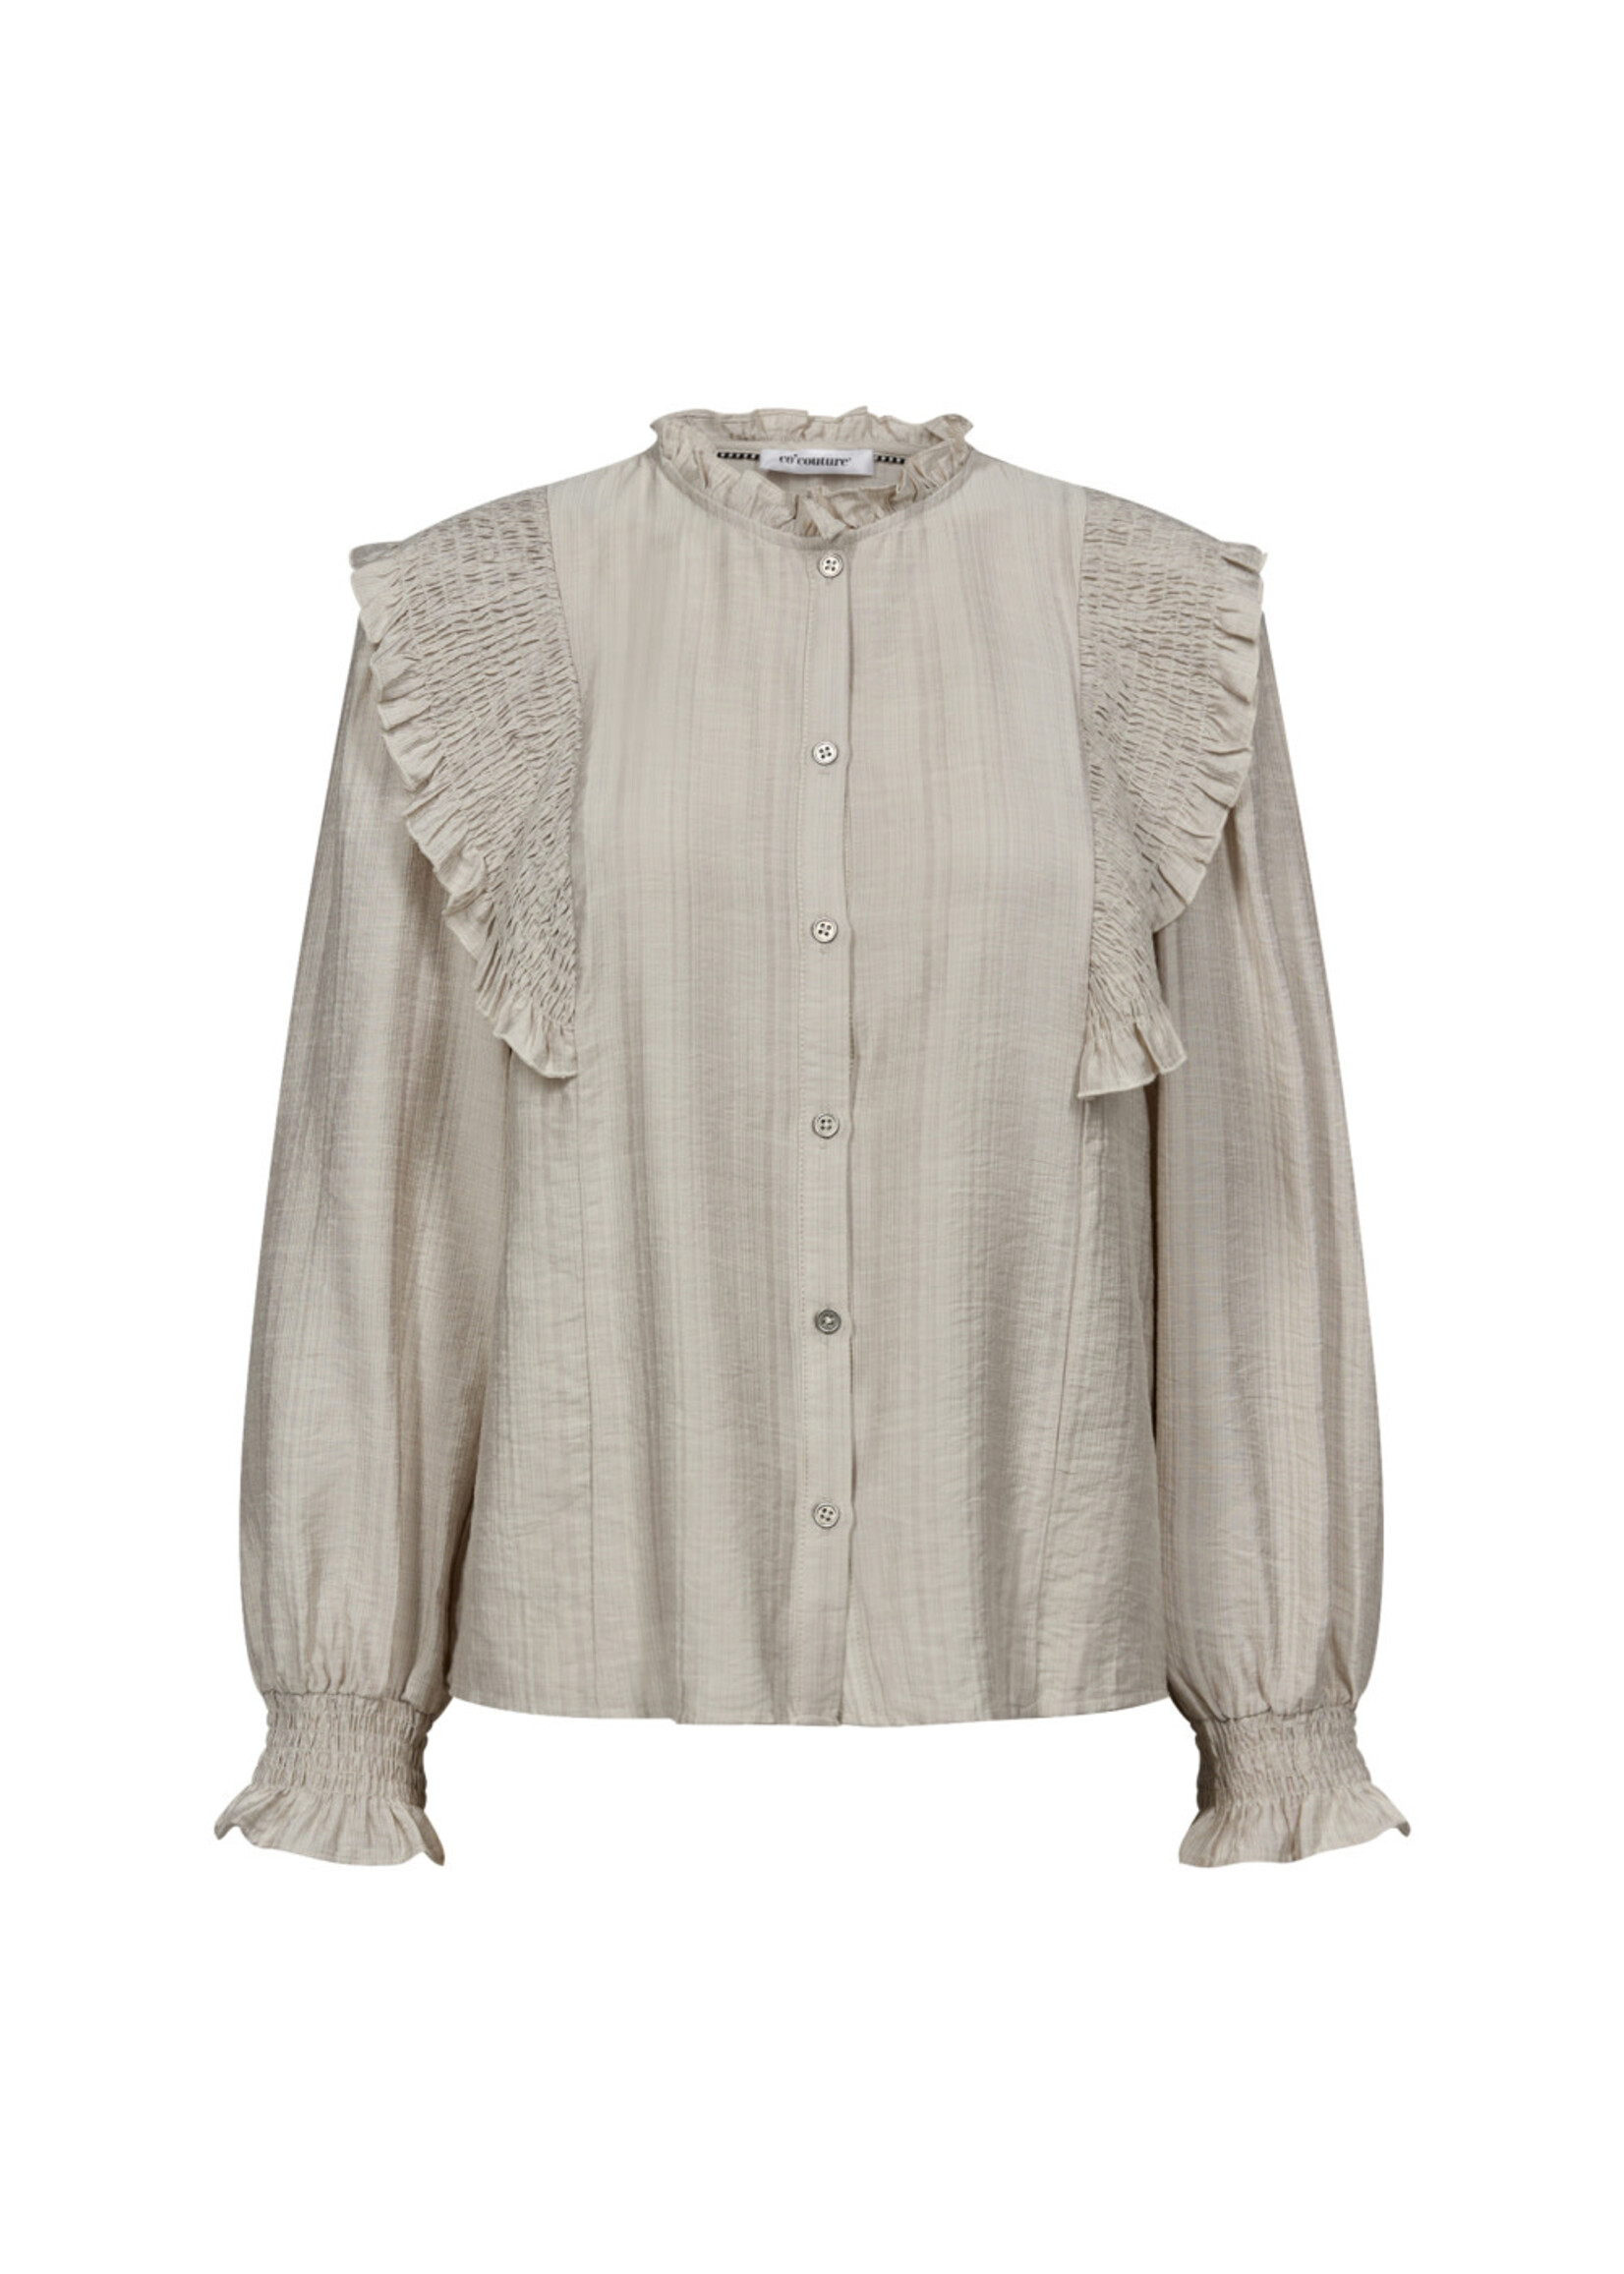 Co Couture Co Couture, AngusCC Smock Frill Shirt, Size: